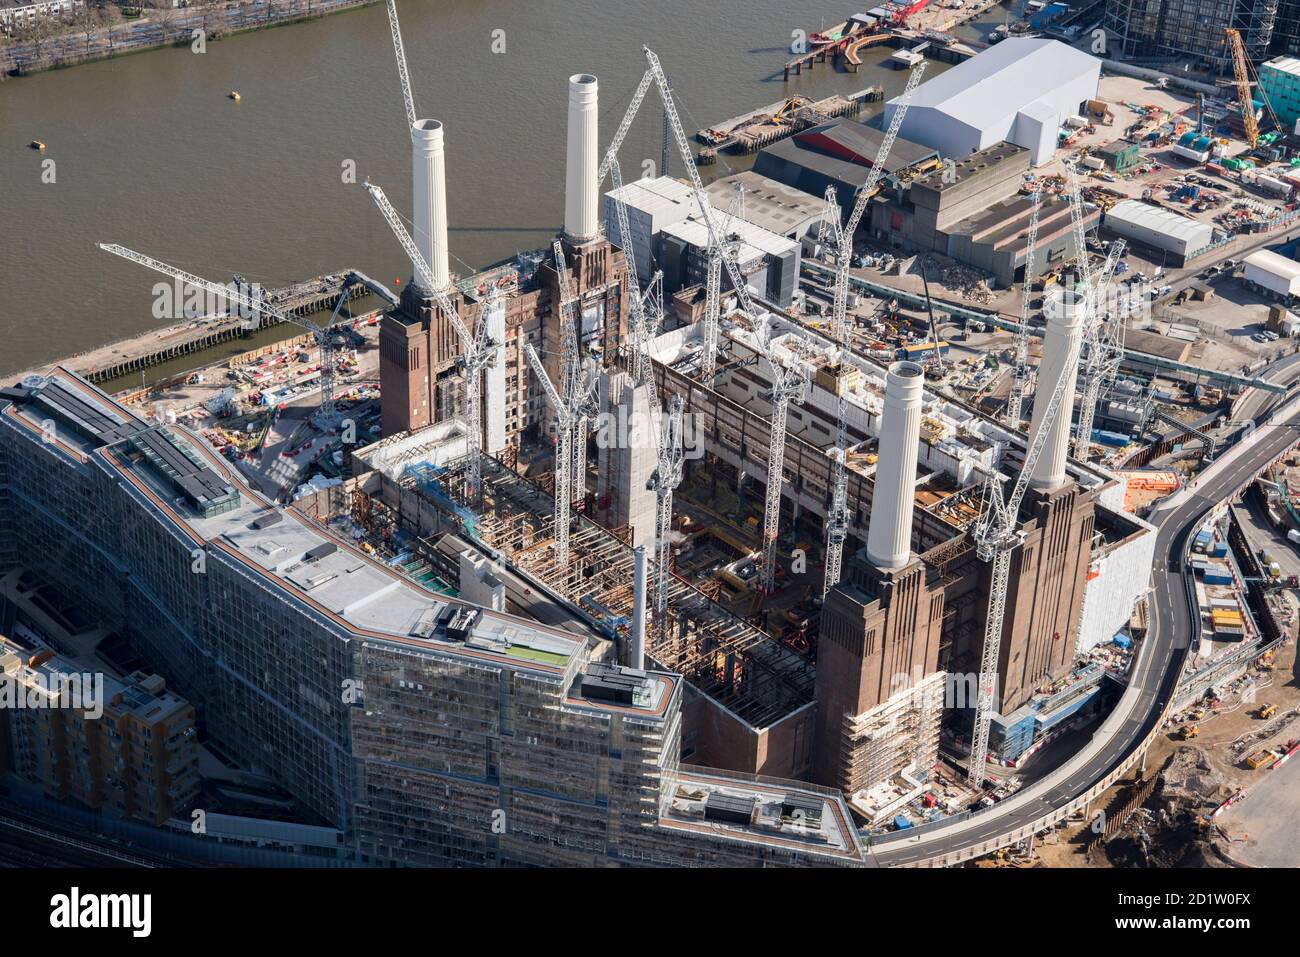 Renovation of Battersea Power Station as part of the Nine Elms Development, London, 2018, UK. Aerial view. Stock Photo